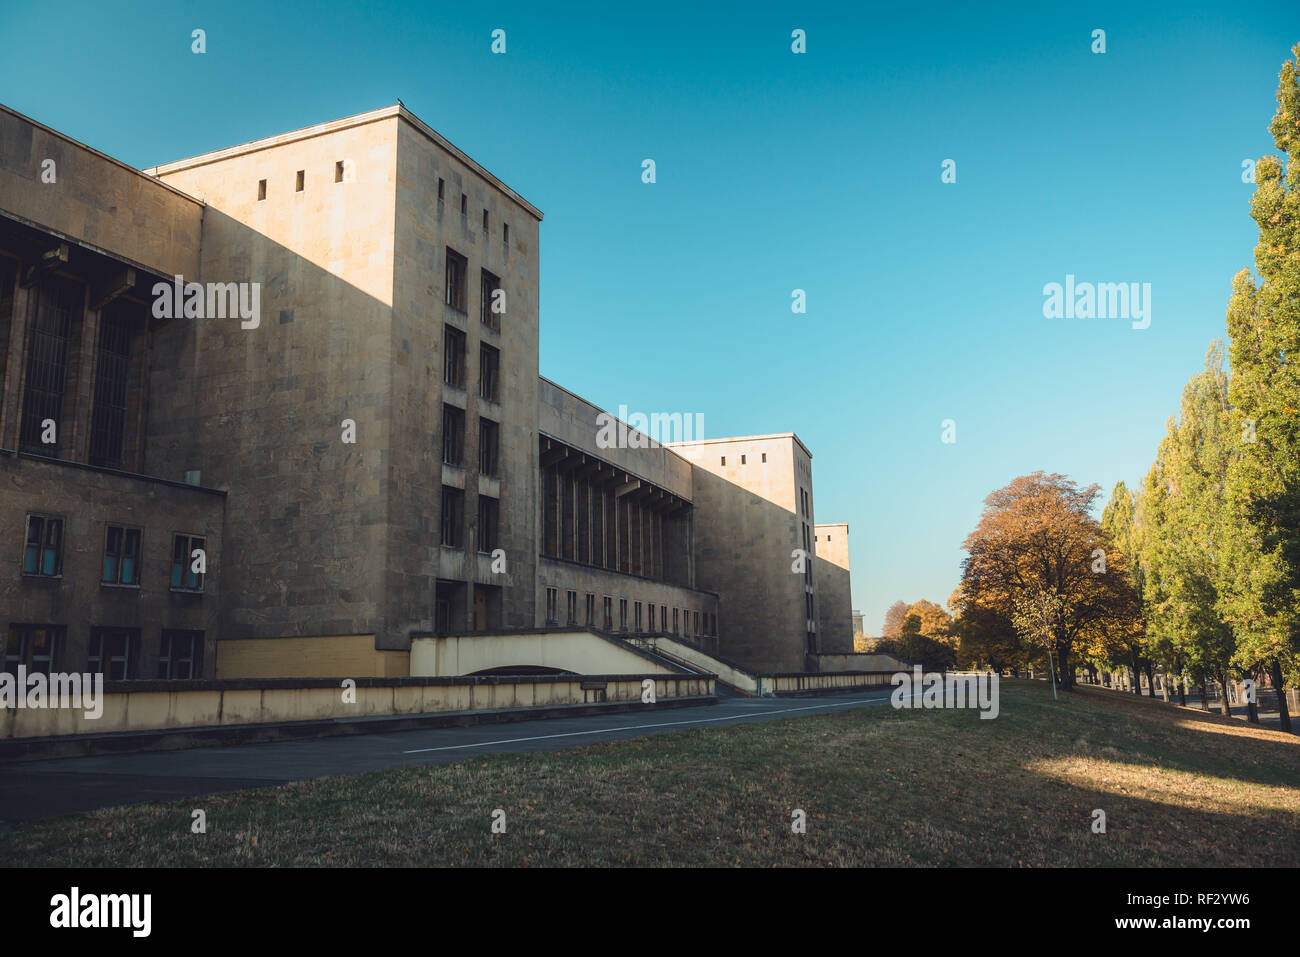 Berlin, Germany November 12, 2018: Architectural details of the historic Tempelhof Airport in Berlin, Germany. Stock Photo